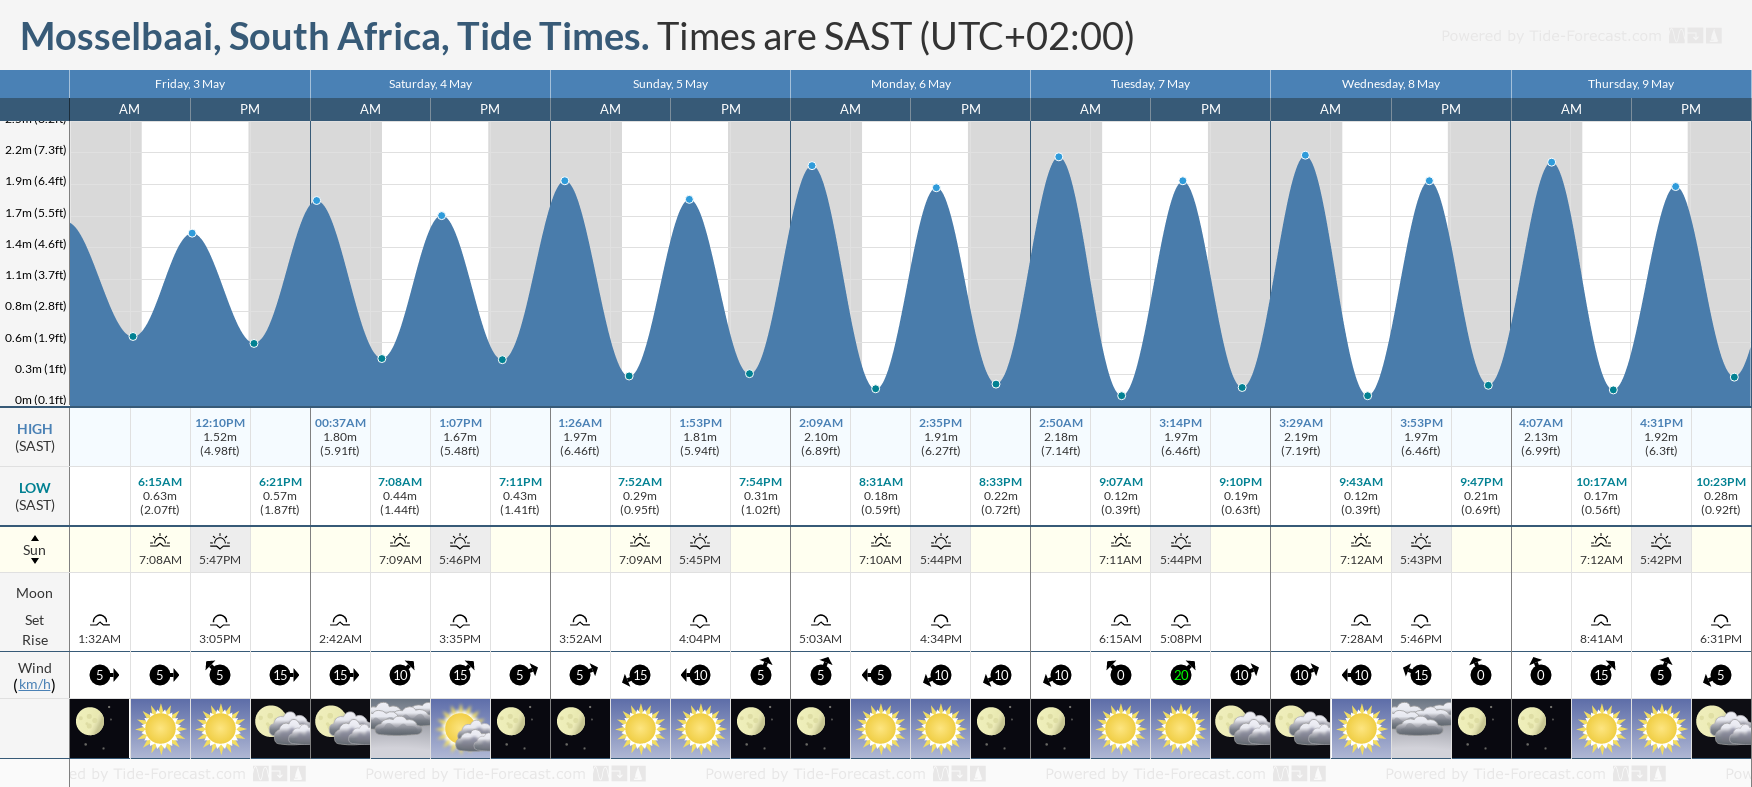 Mosselbaai, South Africa Tide Chart including high and low tide tide times for the next 7 days